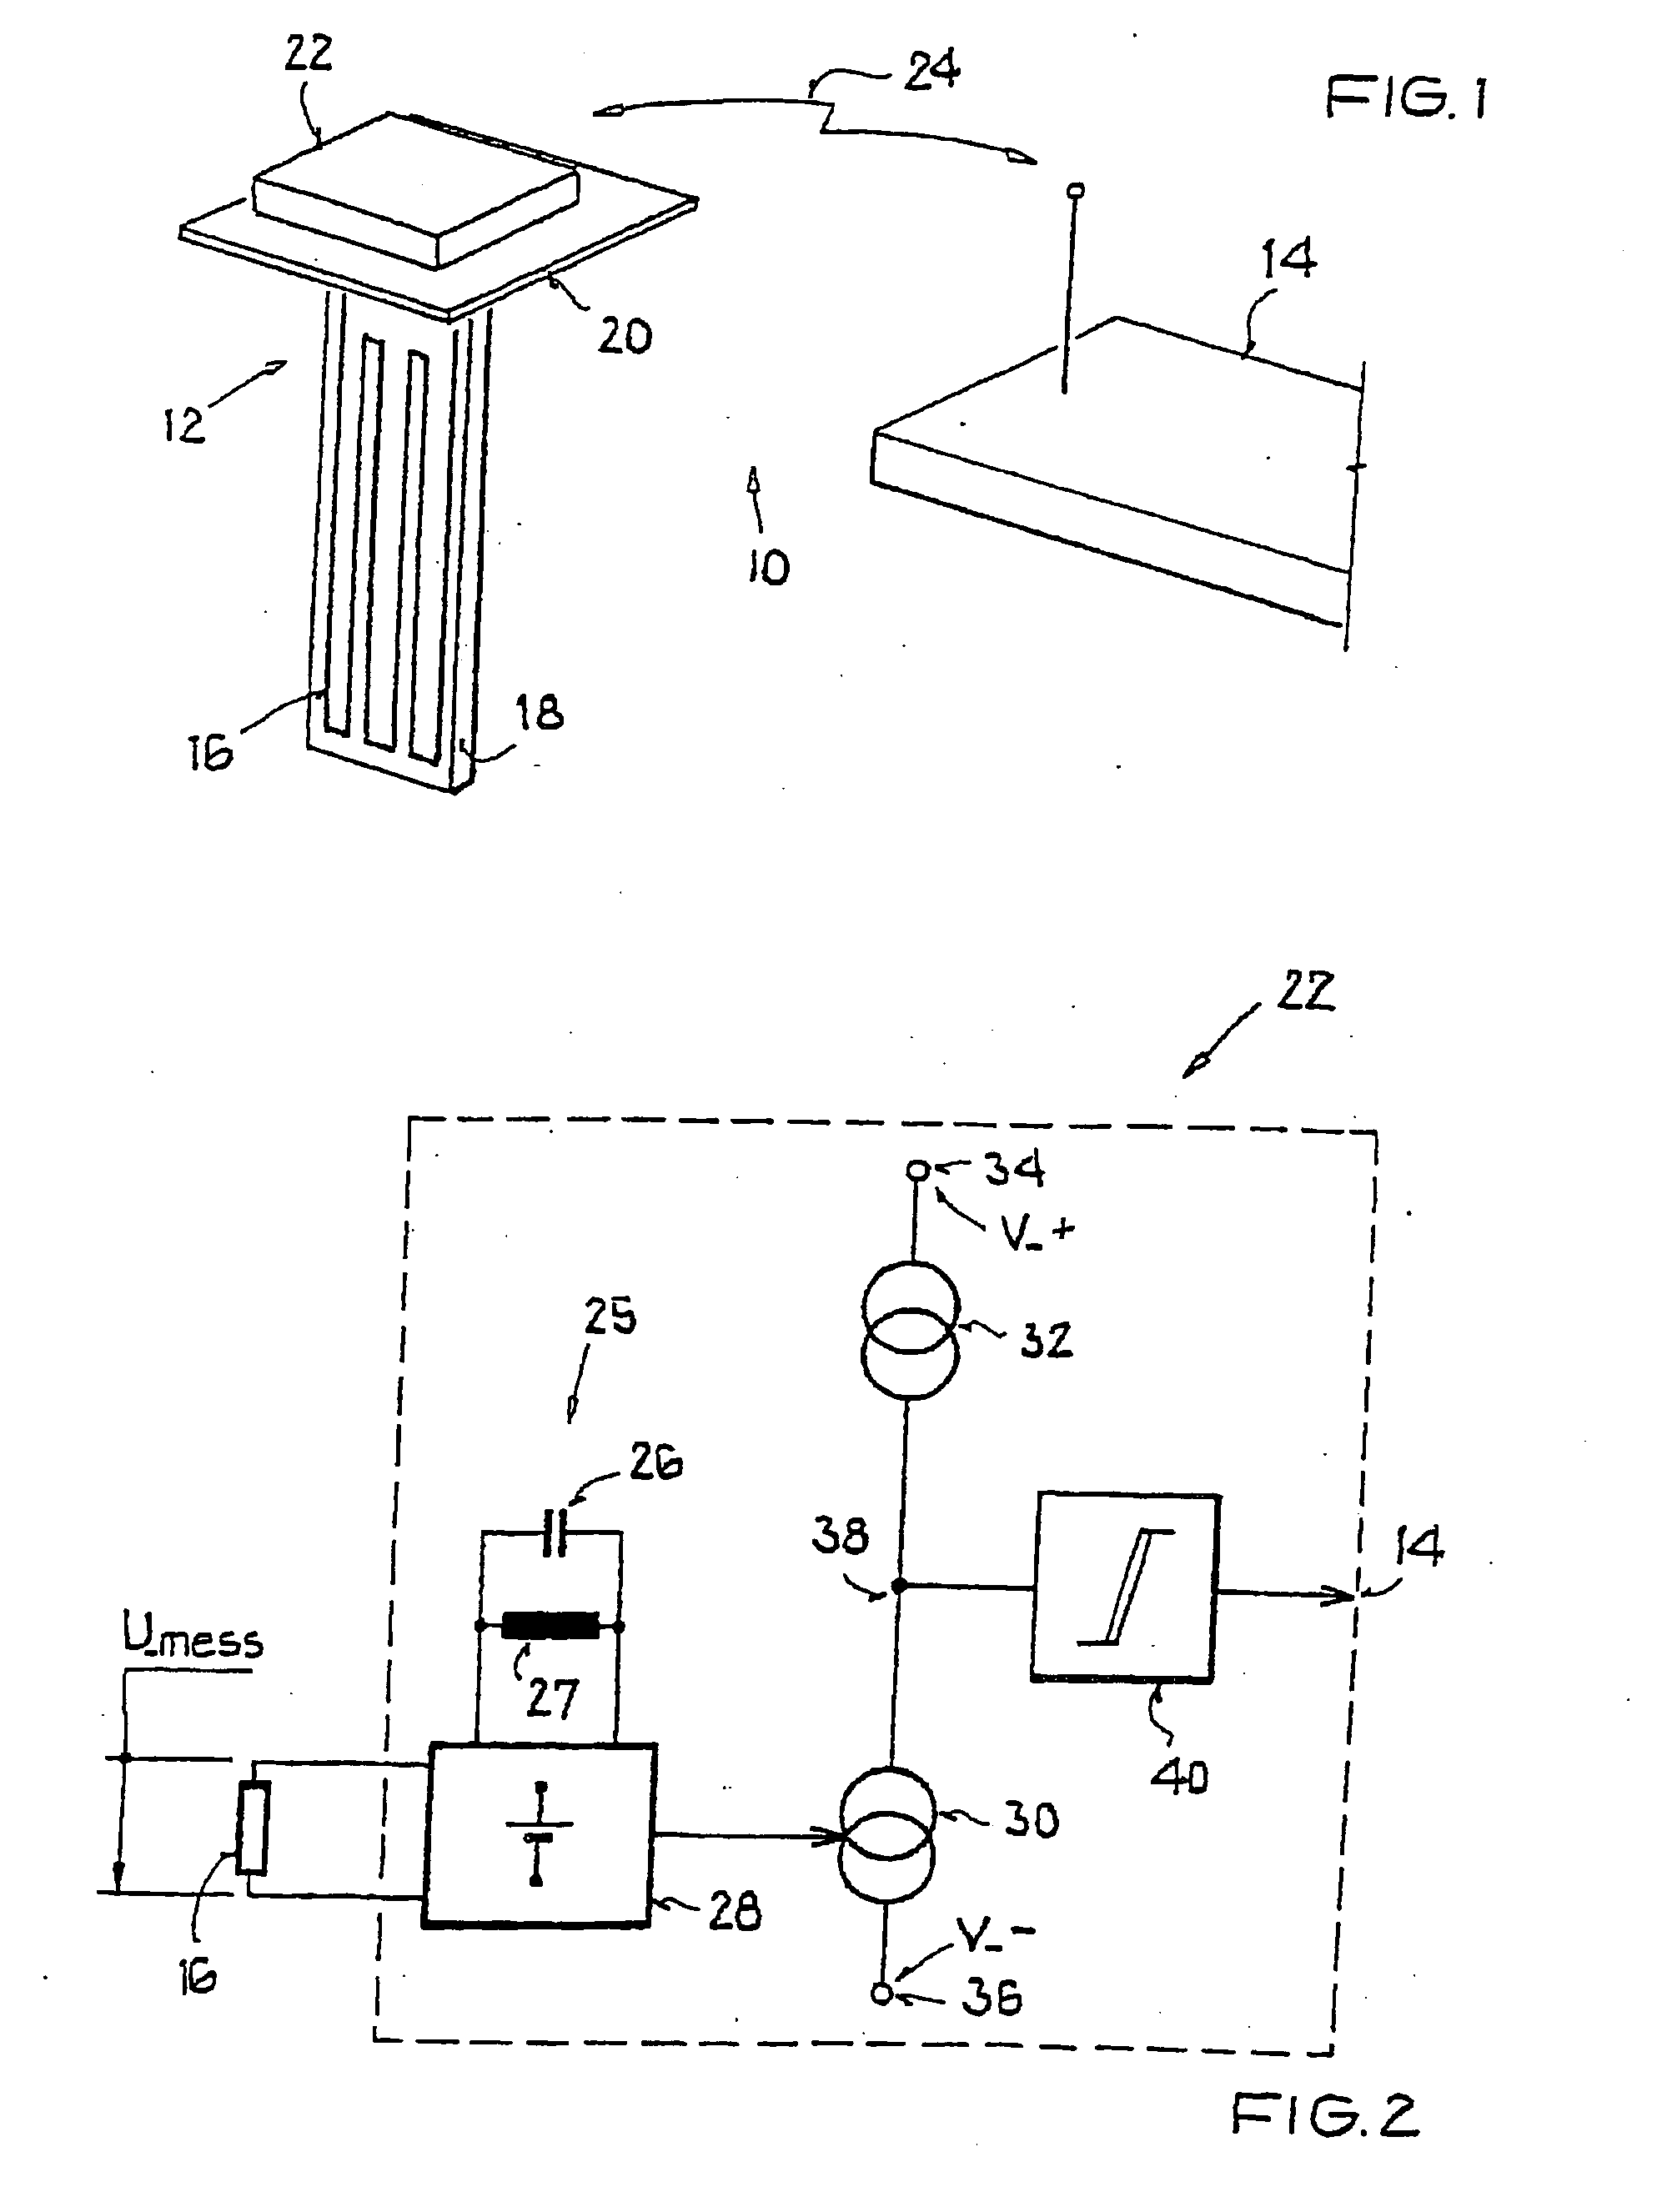 Operating and evaluation circuit of an insect sensor